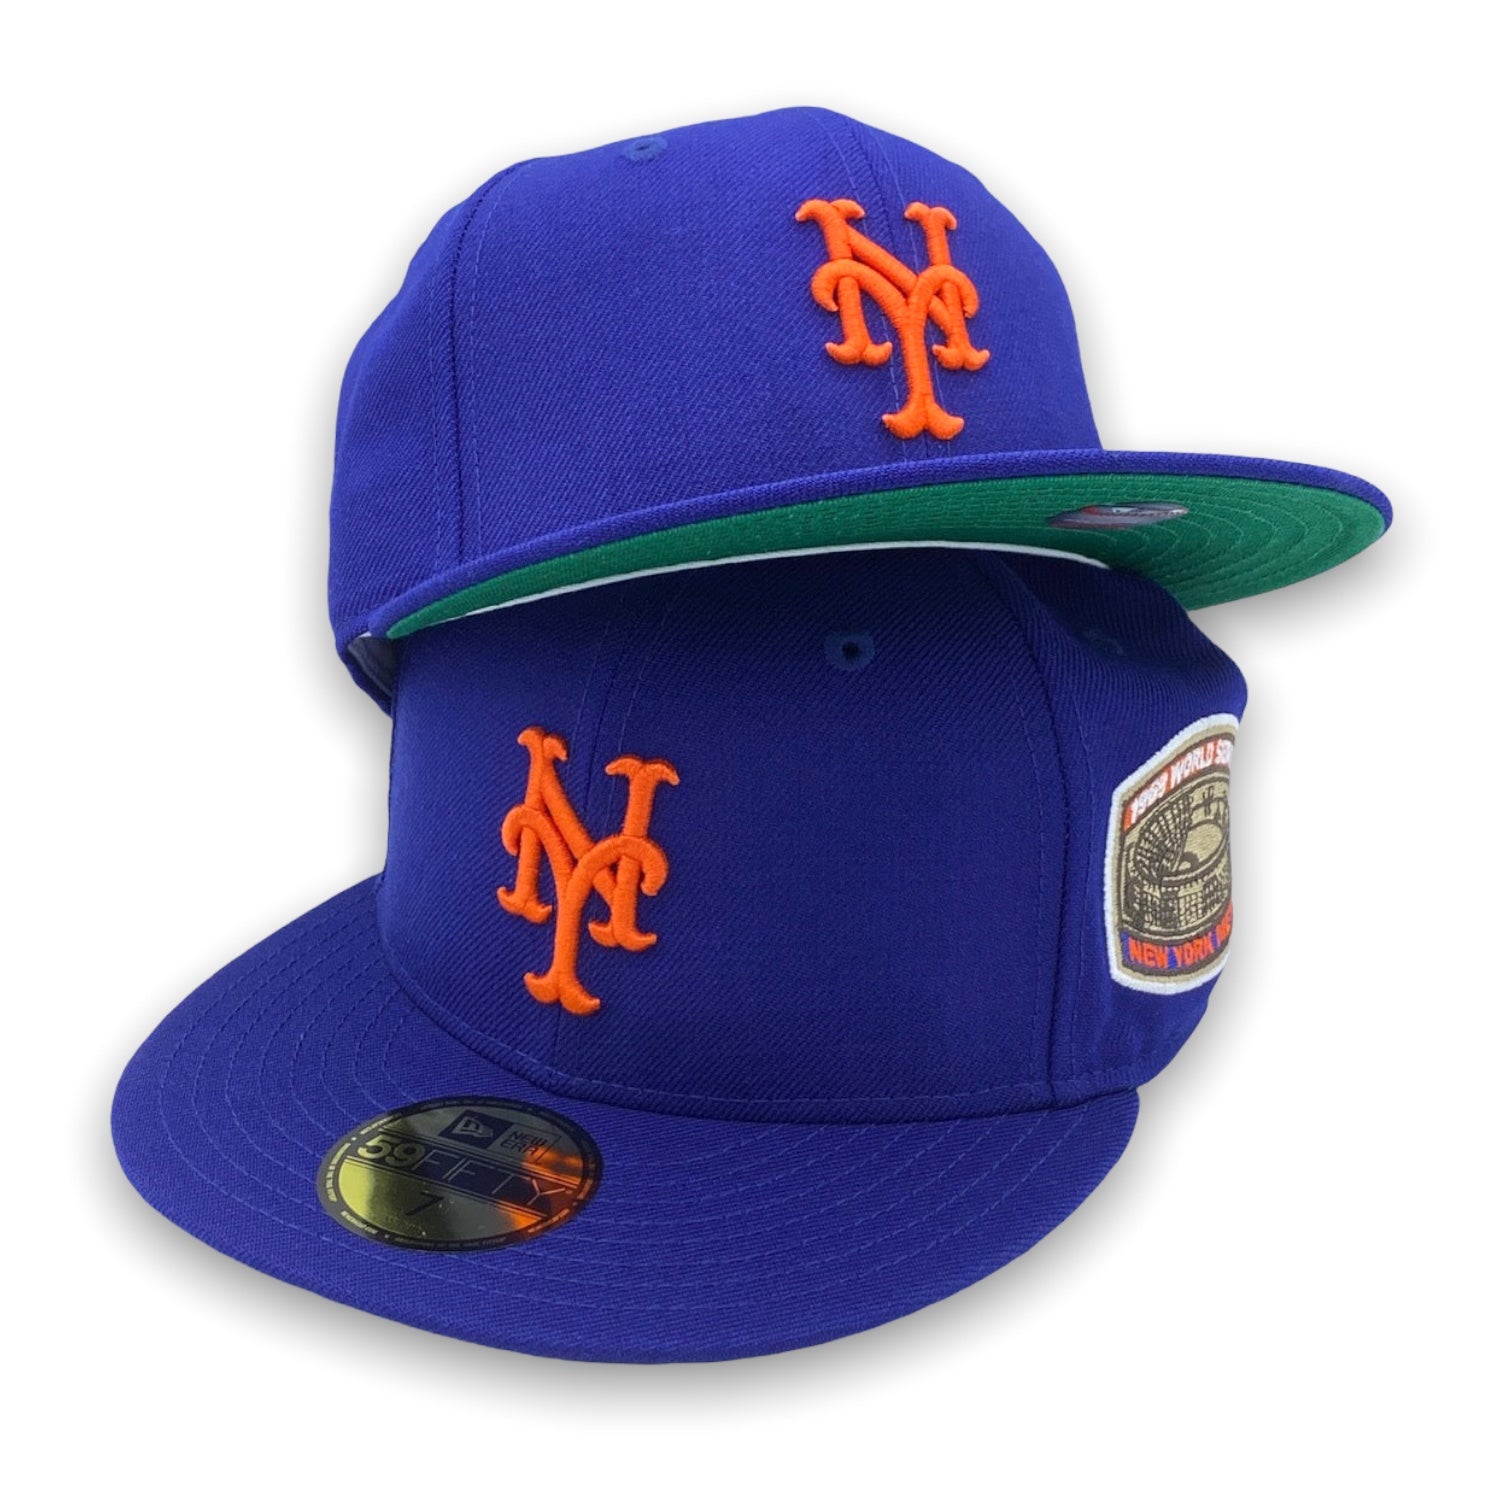 Searching for this Mercury Mets hat from 1999. I know it's widely